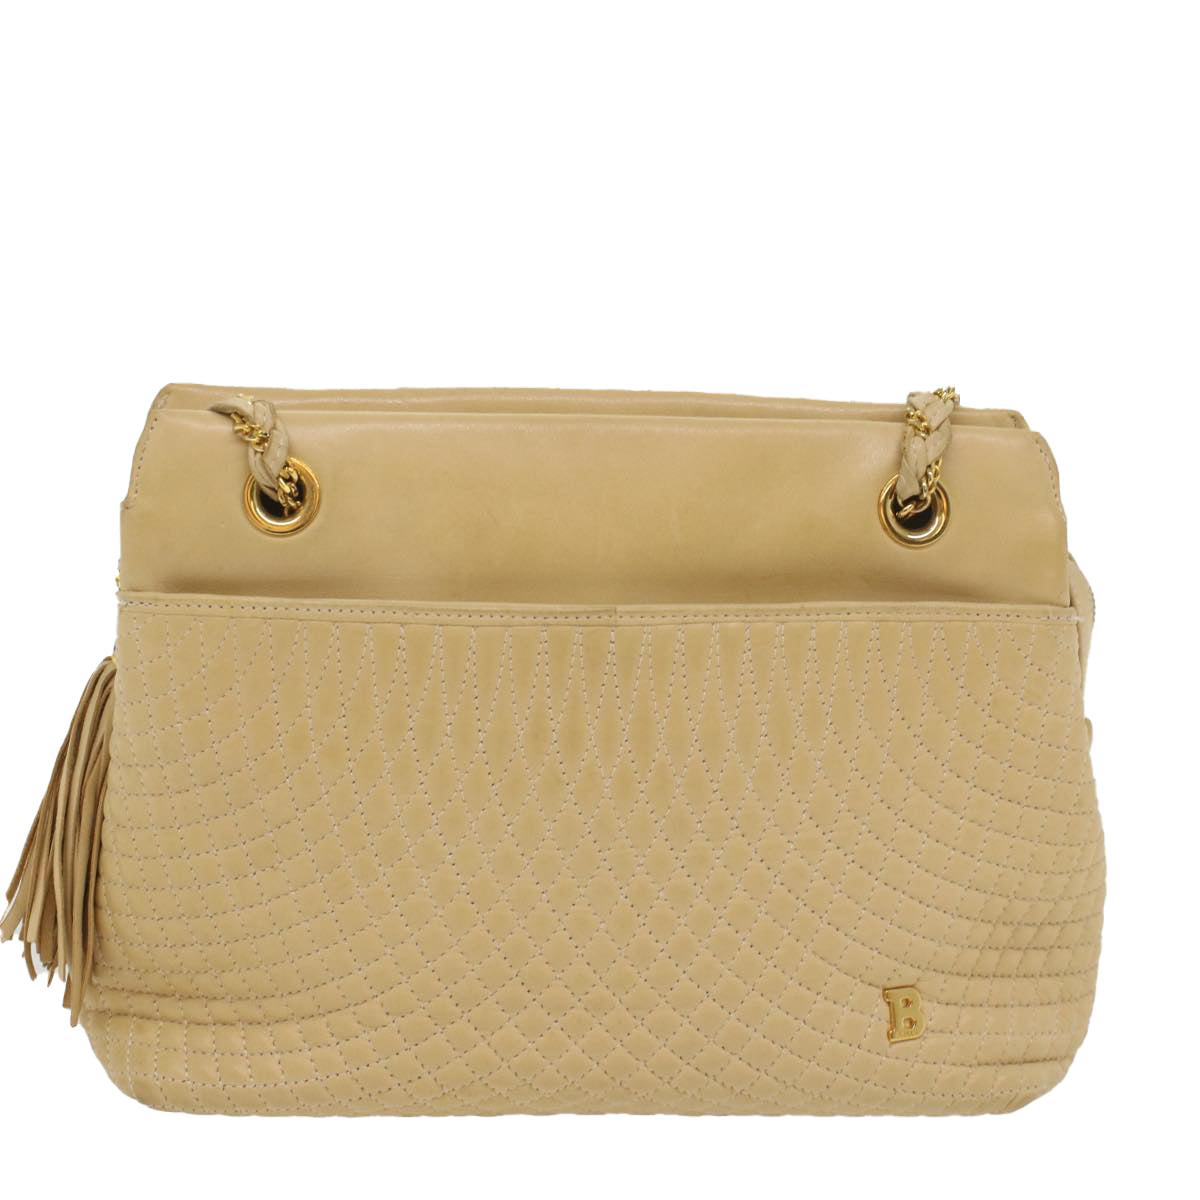 BALLY Quilted Shoulder Bag Leather Beige Auth yb383